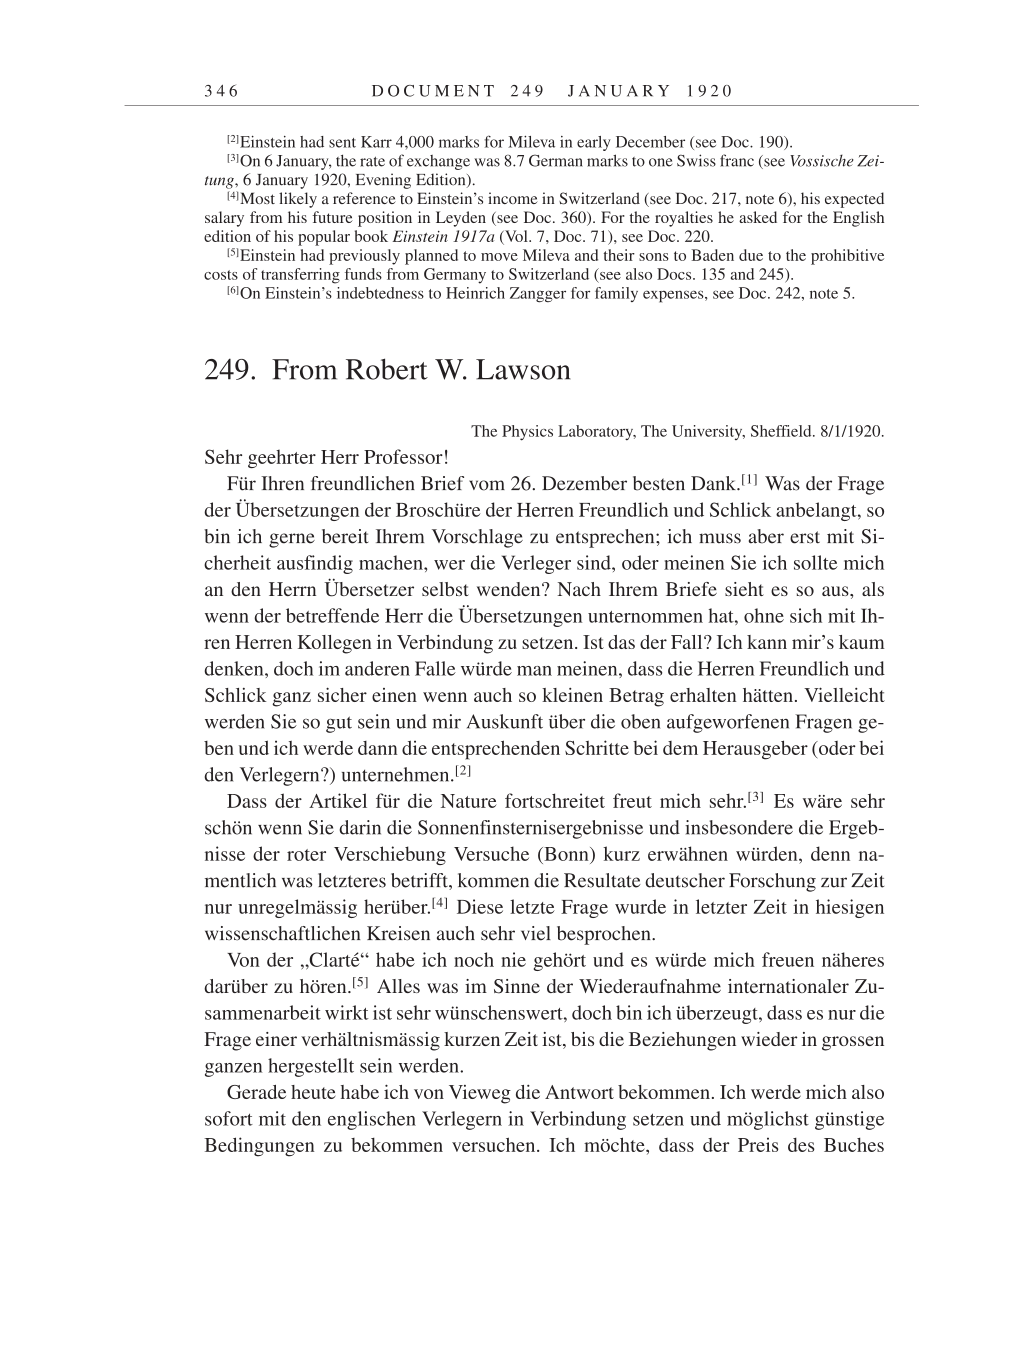 Volume 9: The Berlin Years: Correspondence January 1919-April 1920 page 346